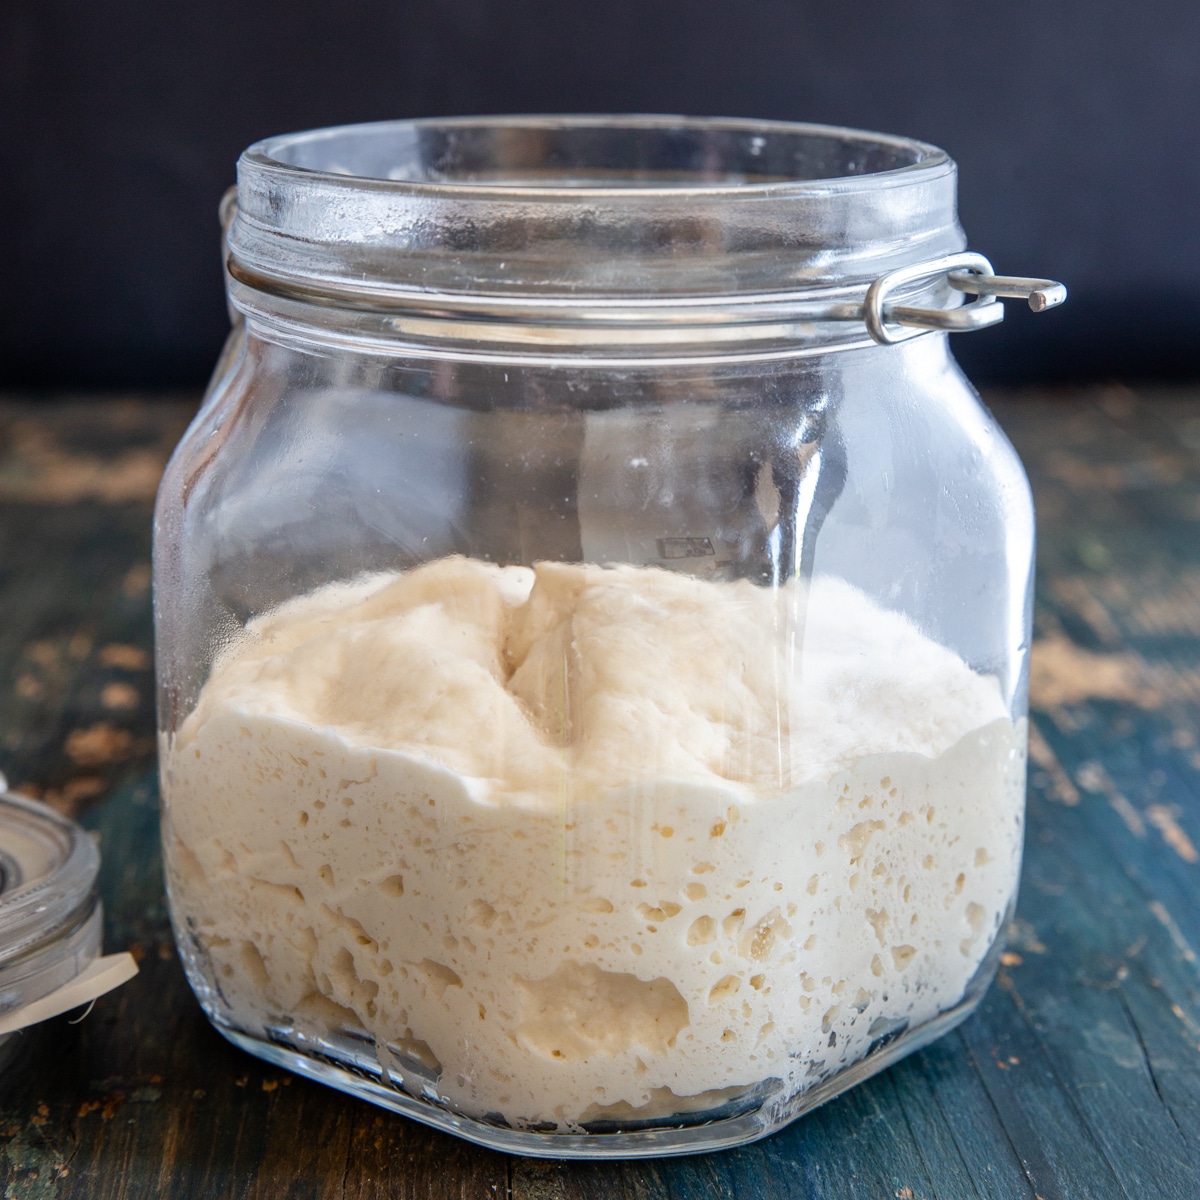 Italian Sourdough Starter is made a little bit different then the more well known version. This is a lower hydration starter which also takes longer to produce.